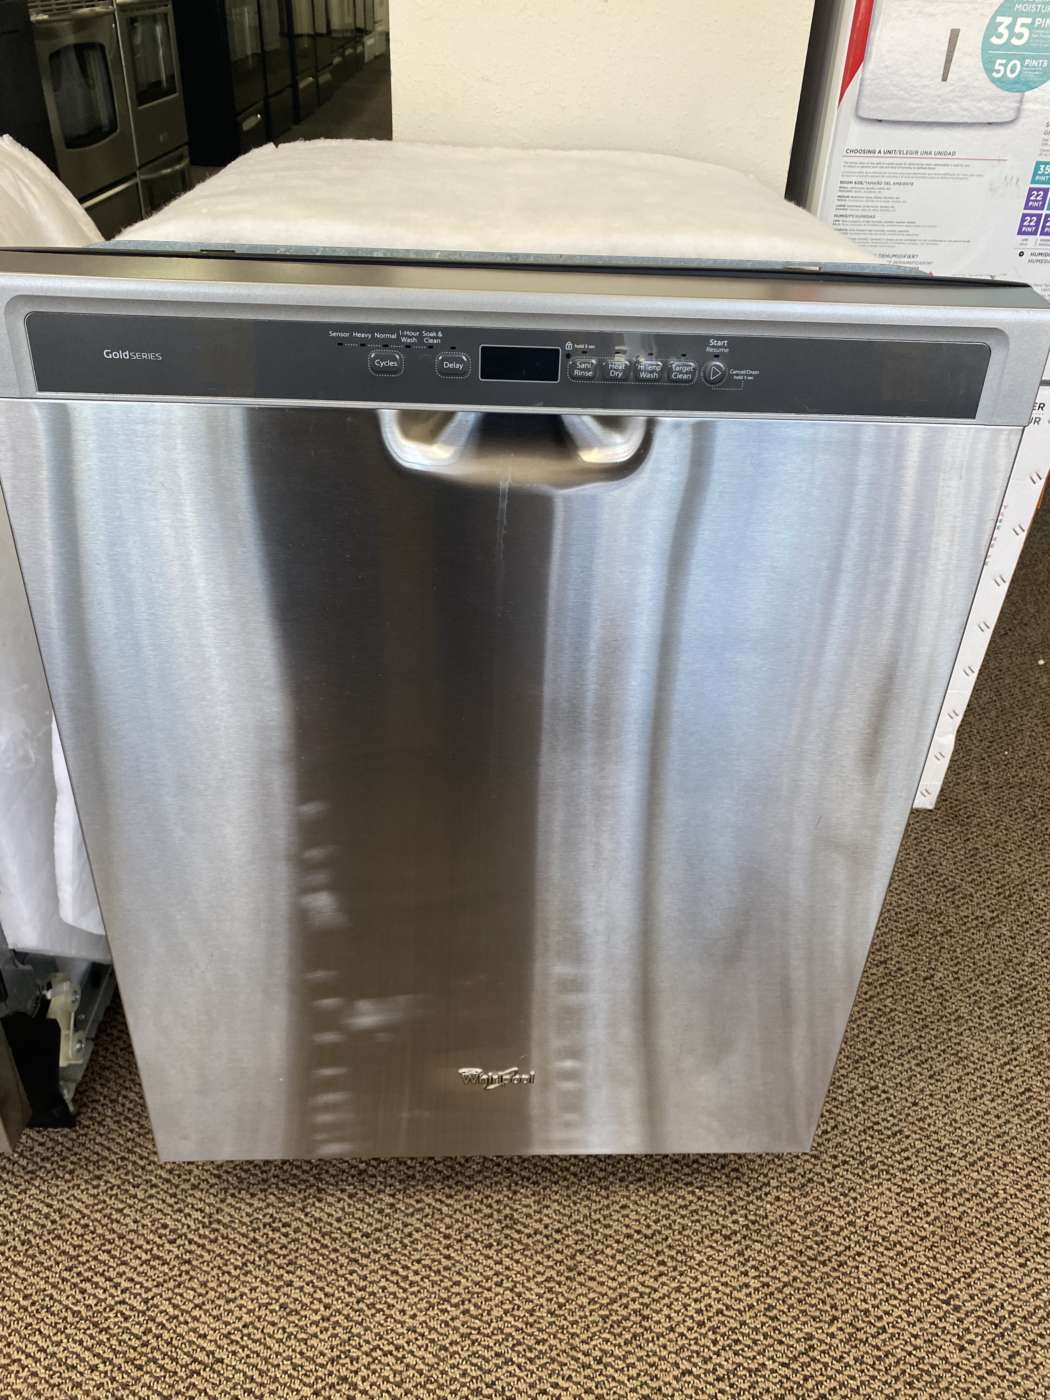 Reconditioned WHIRLPOOL Stainless-Tub Built-In Dishwasher – Stainless